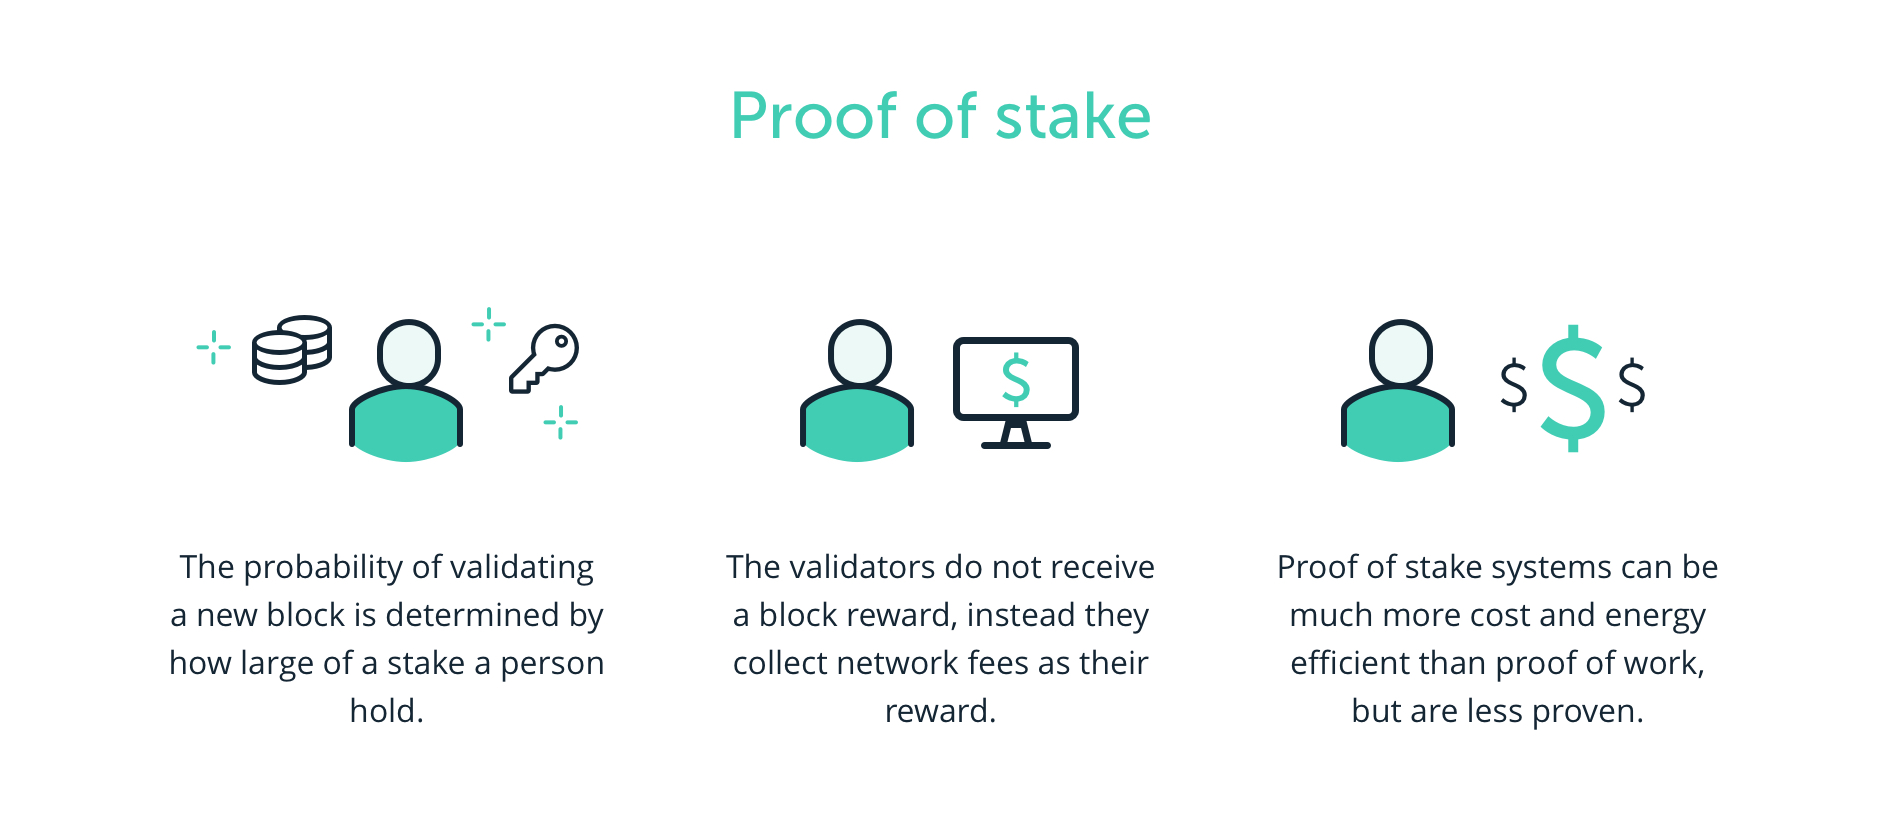 What Does Proof-of-Stake (PoS) Mean in Crypto?